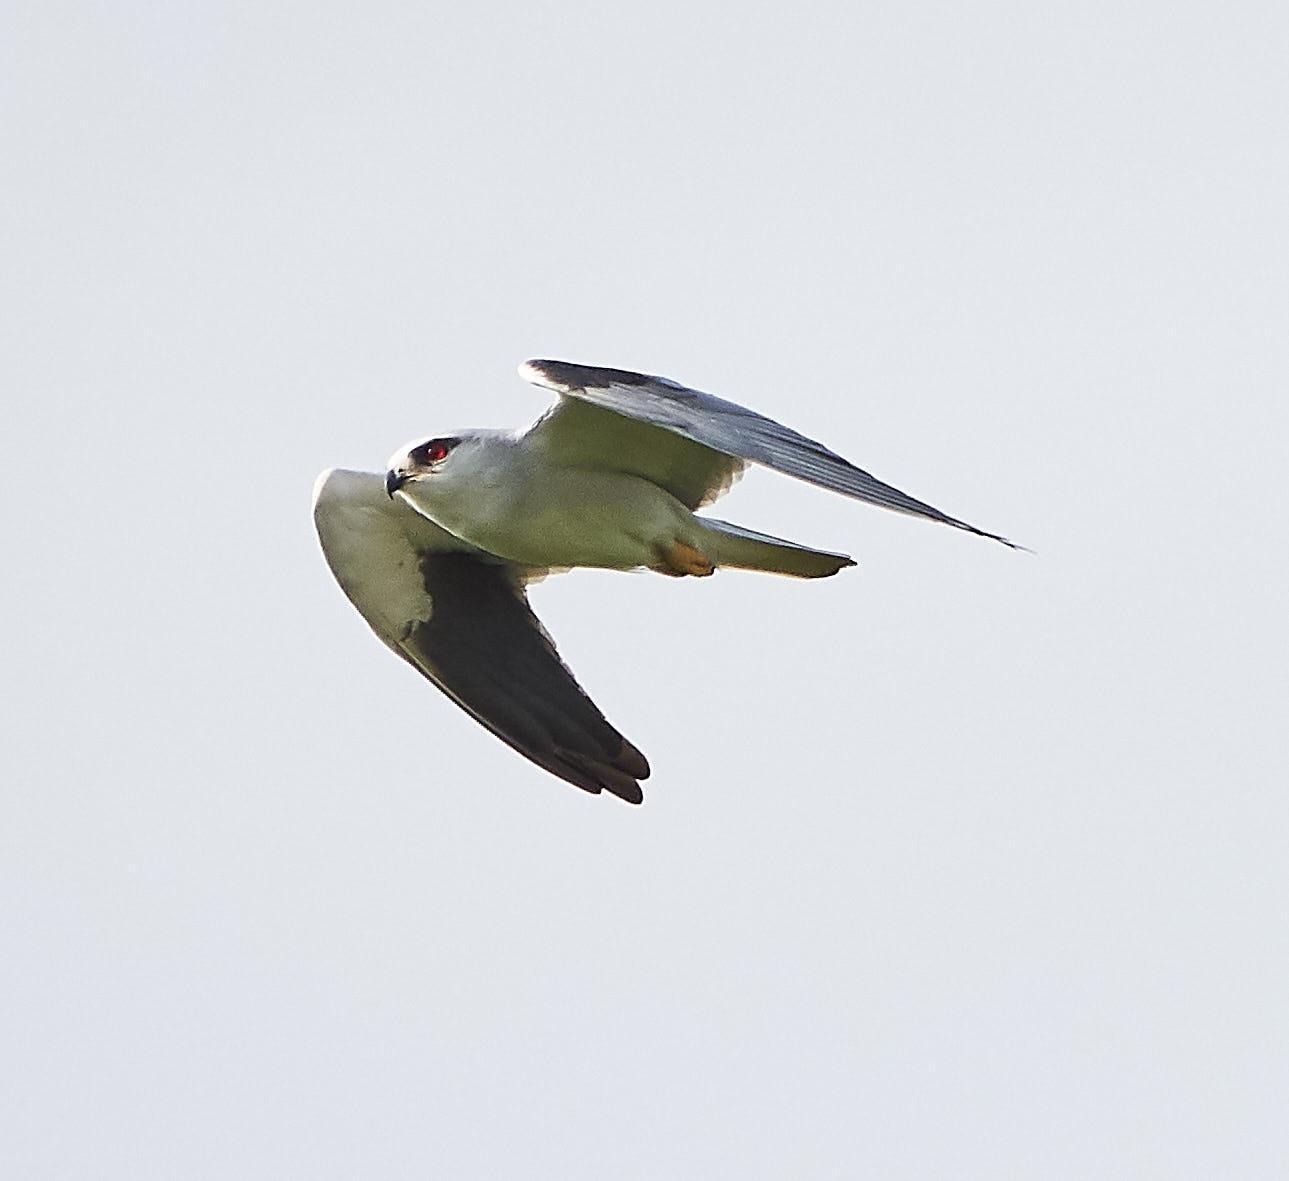 Black-winged Kite Photo by Steven Cheong